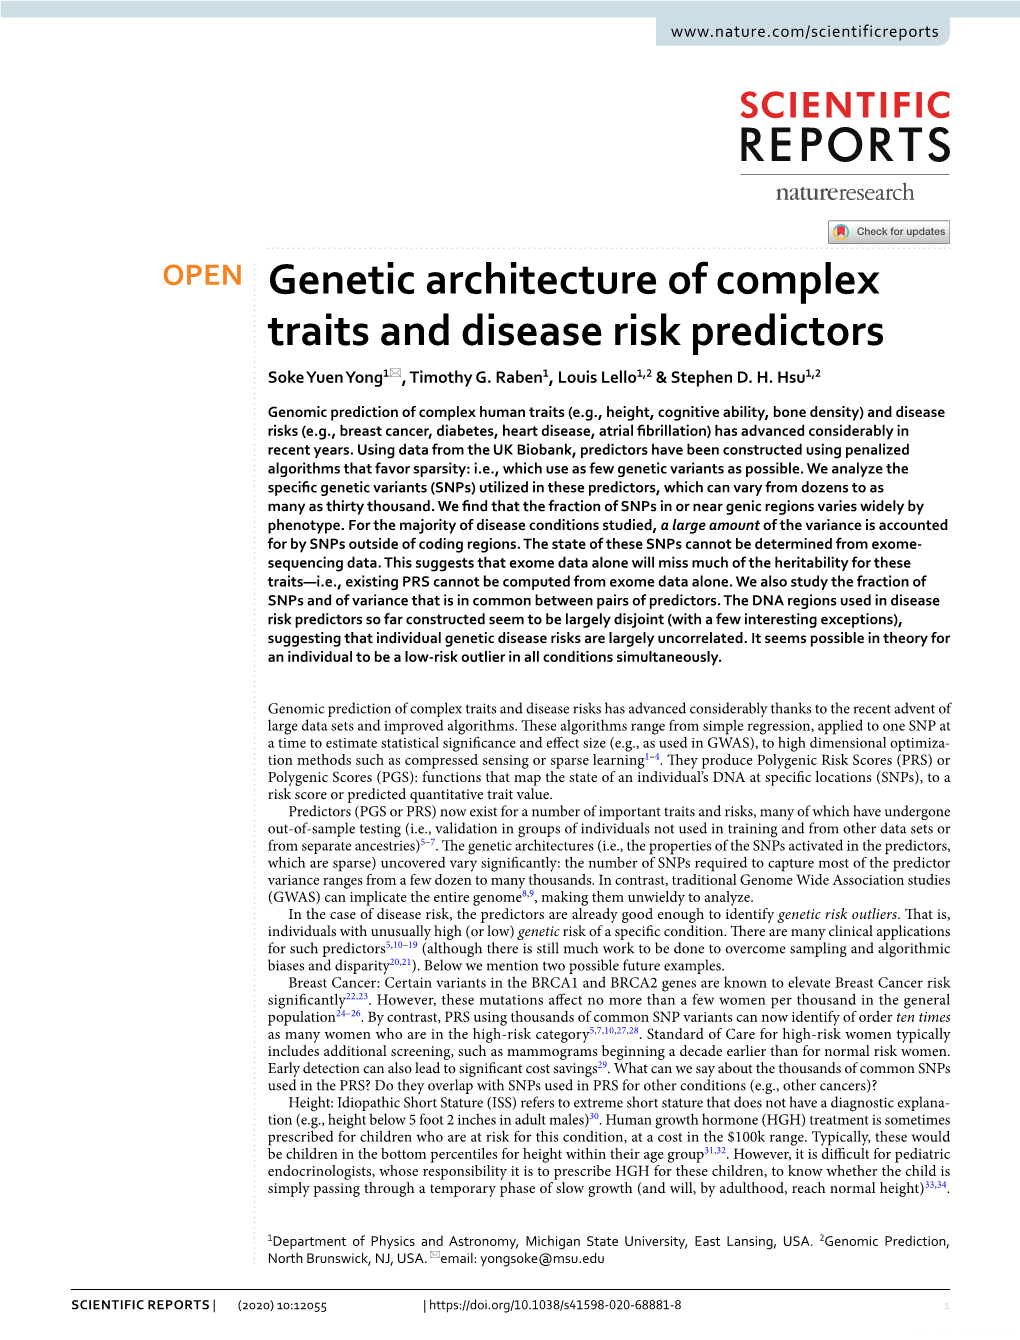 Genetic Architecture of Complex Traits and Disease Risk Predictors Soke Yuen Yong1*, Timothy G